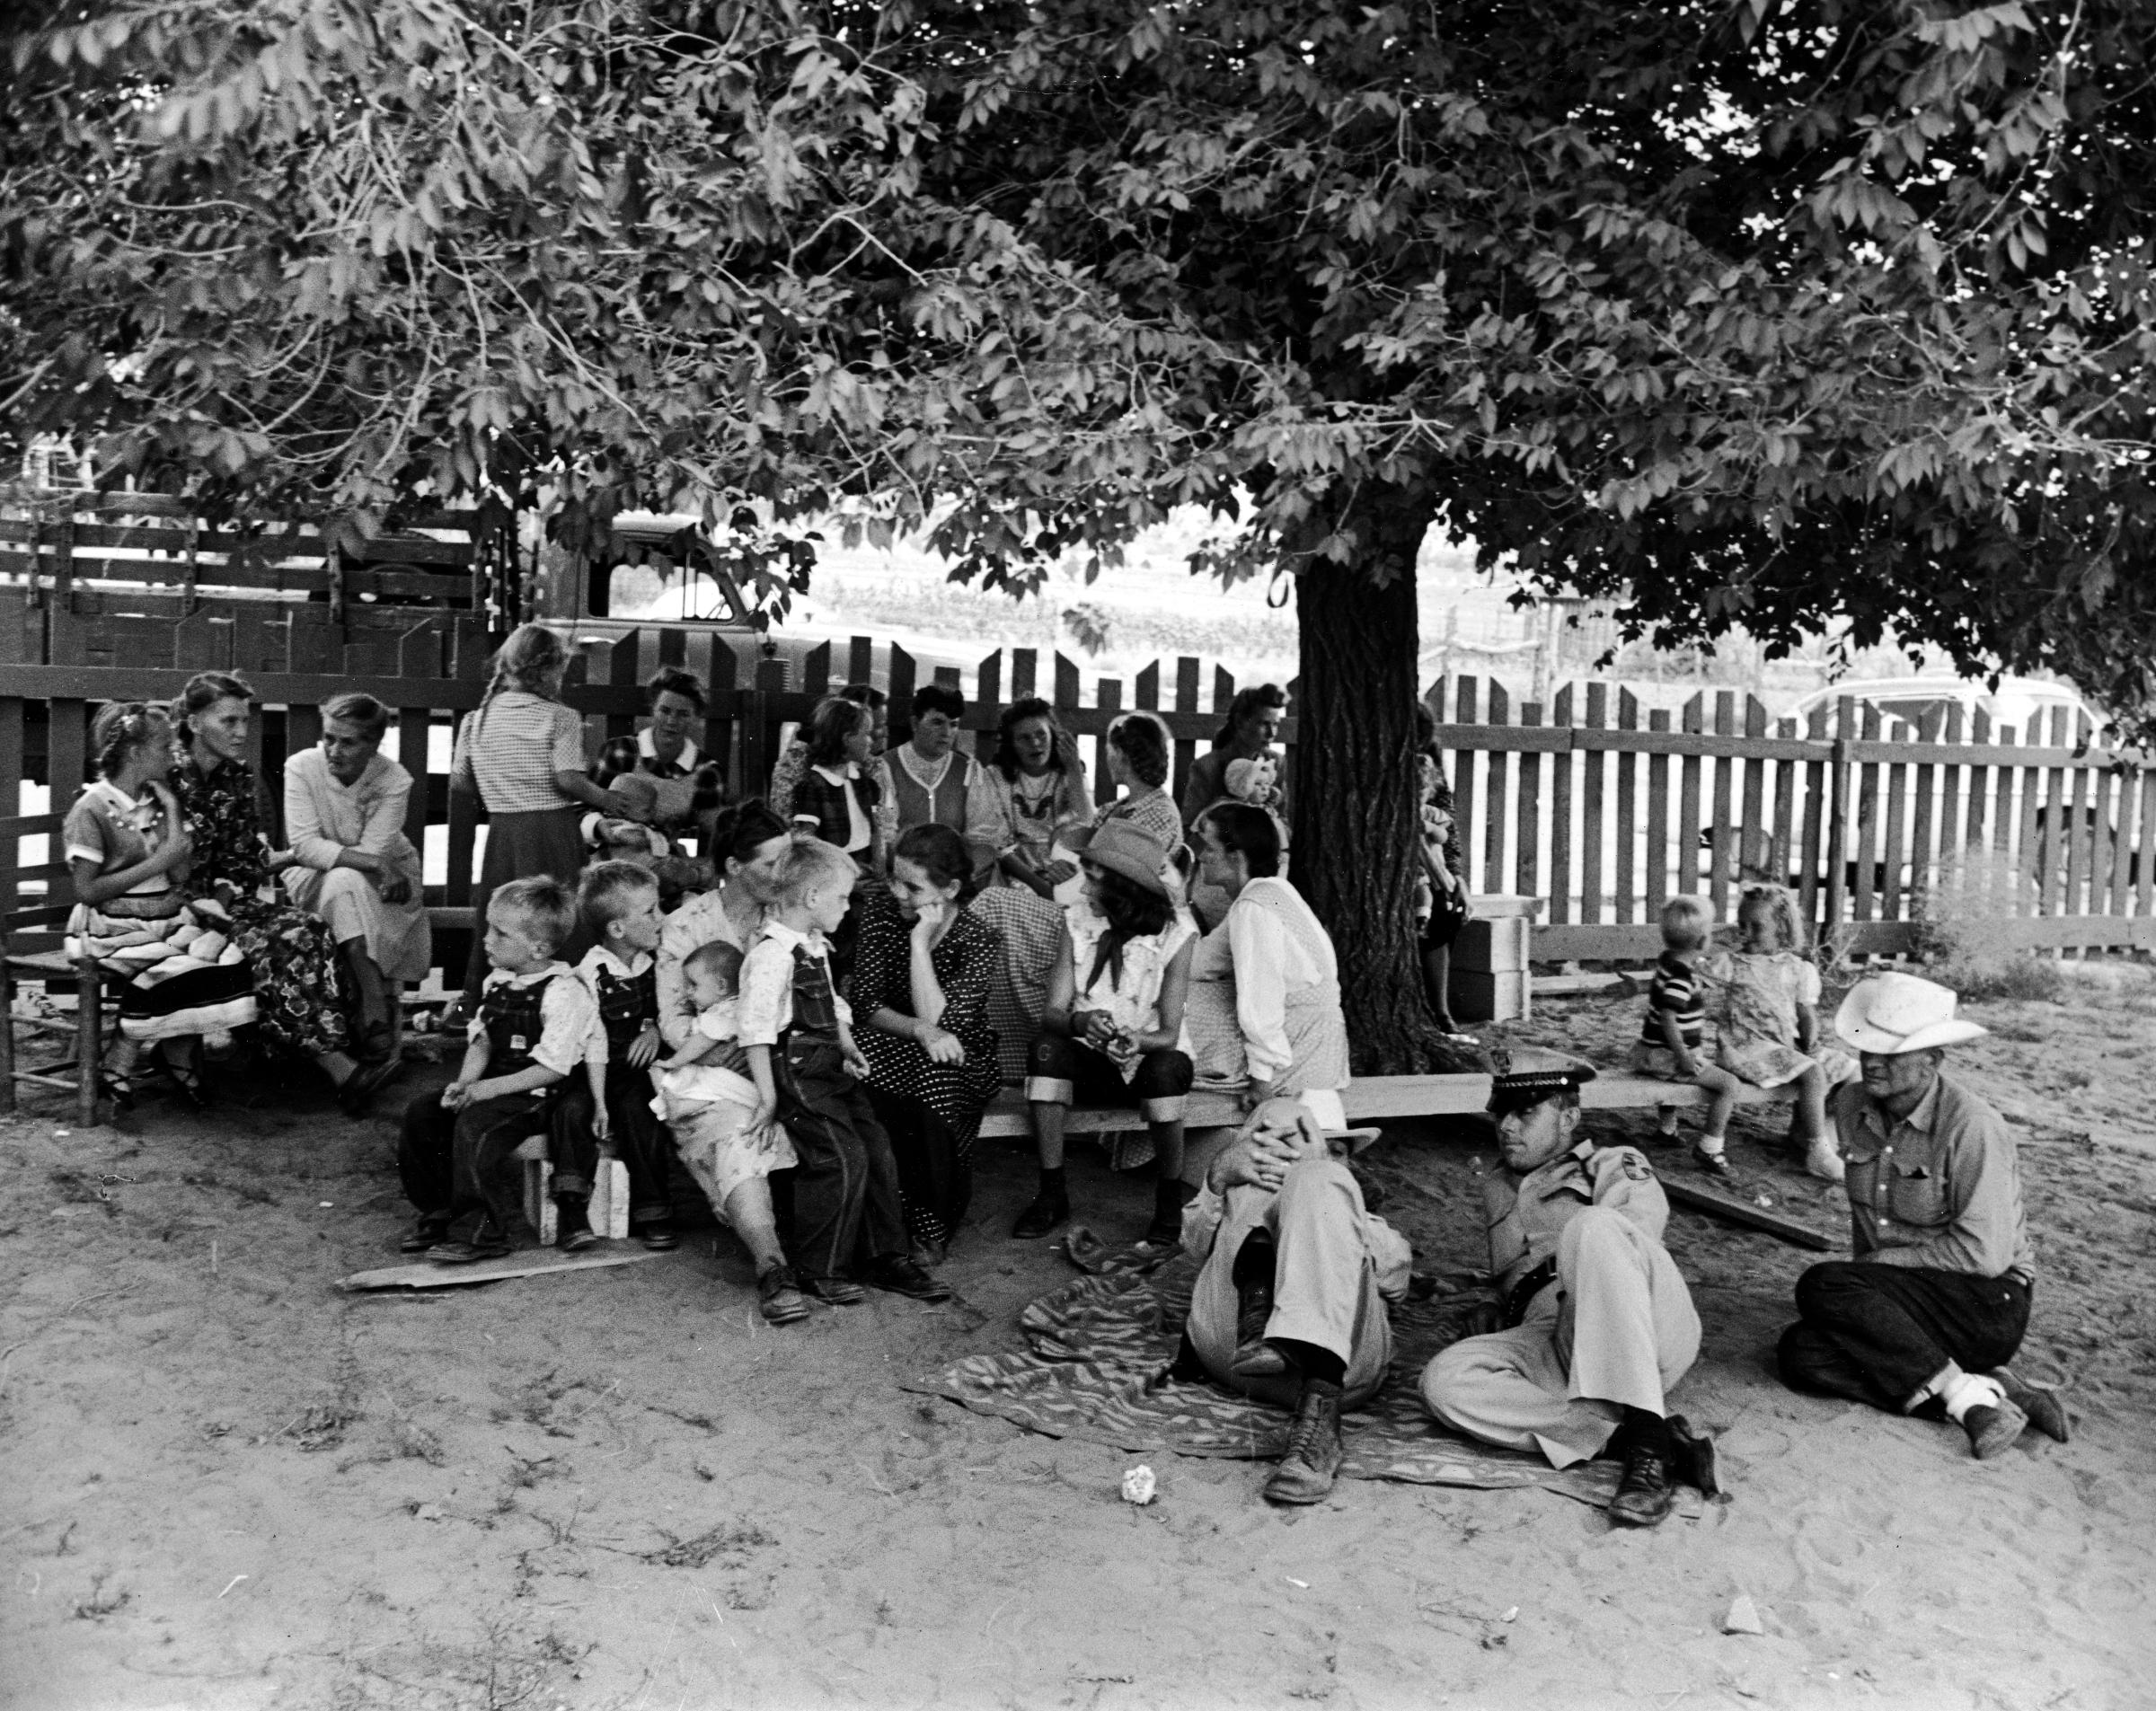 Short Creek raid, Arizona, 1953. As arraignments of the adults drag on in Short Creek's schoolhouse, transformed by the authorities into a temporary site for pre-trial hearings, a group of children and women wait in the schoolyard with state police guarding them.